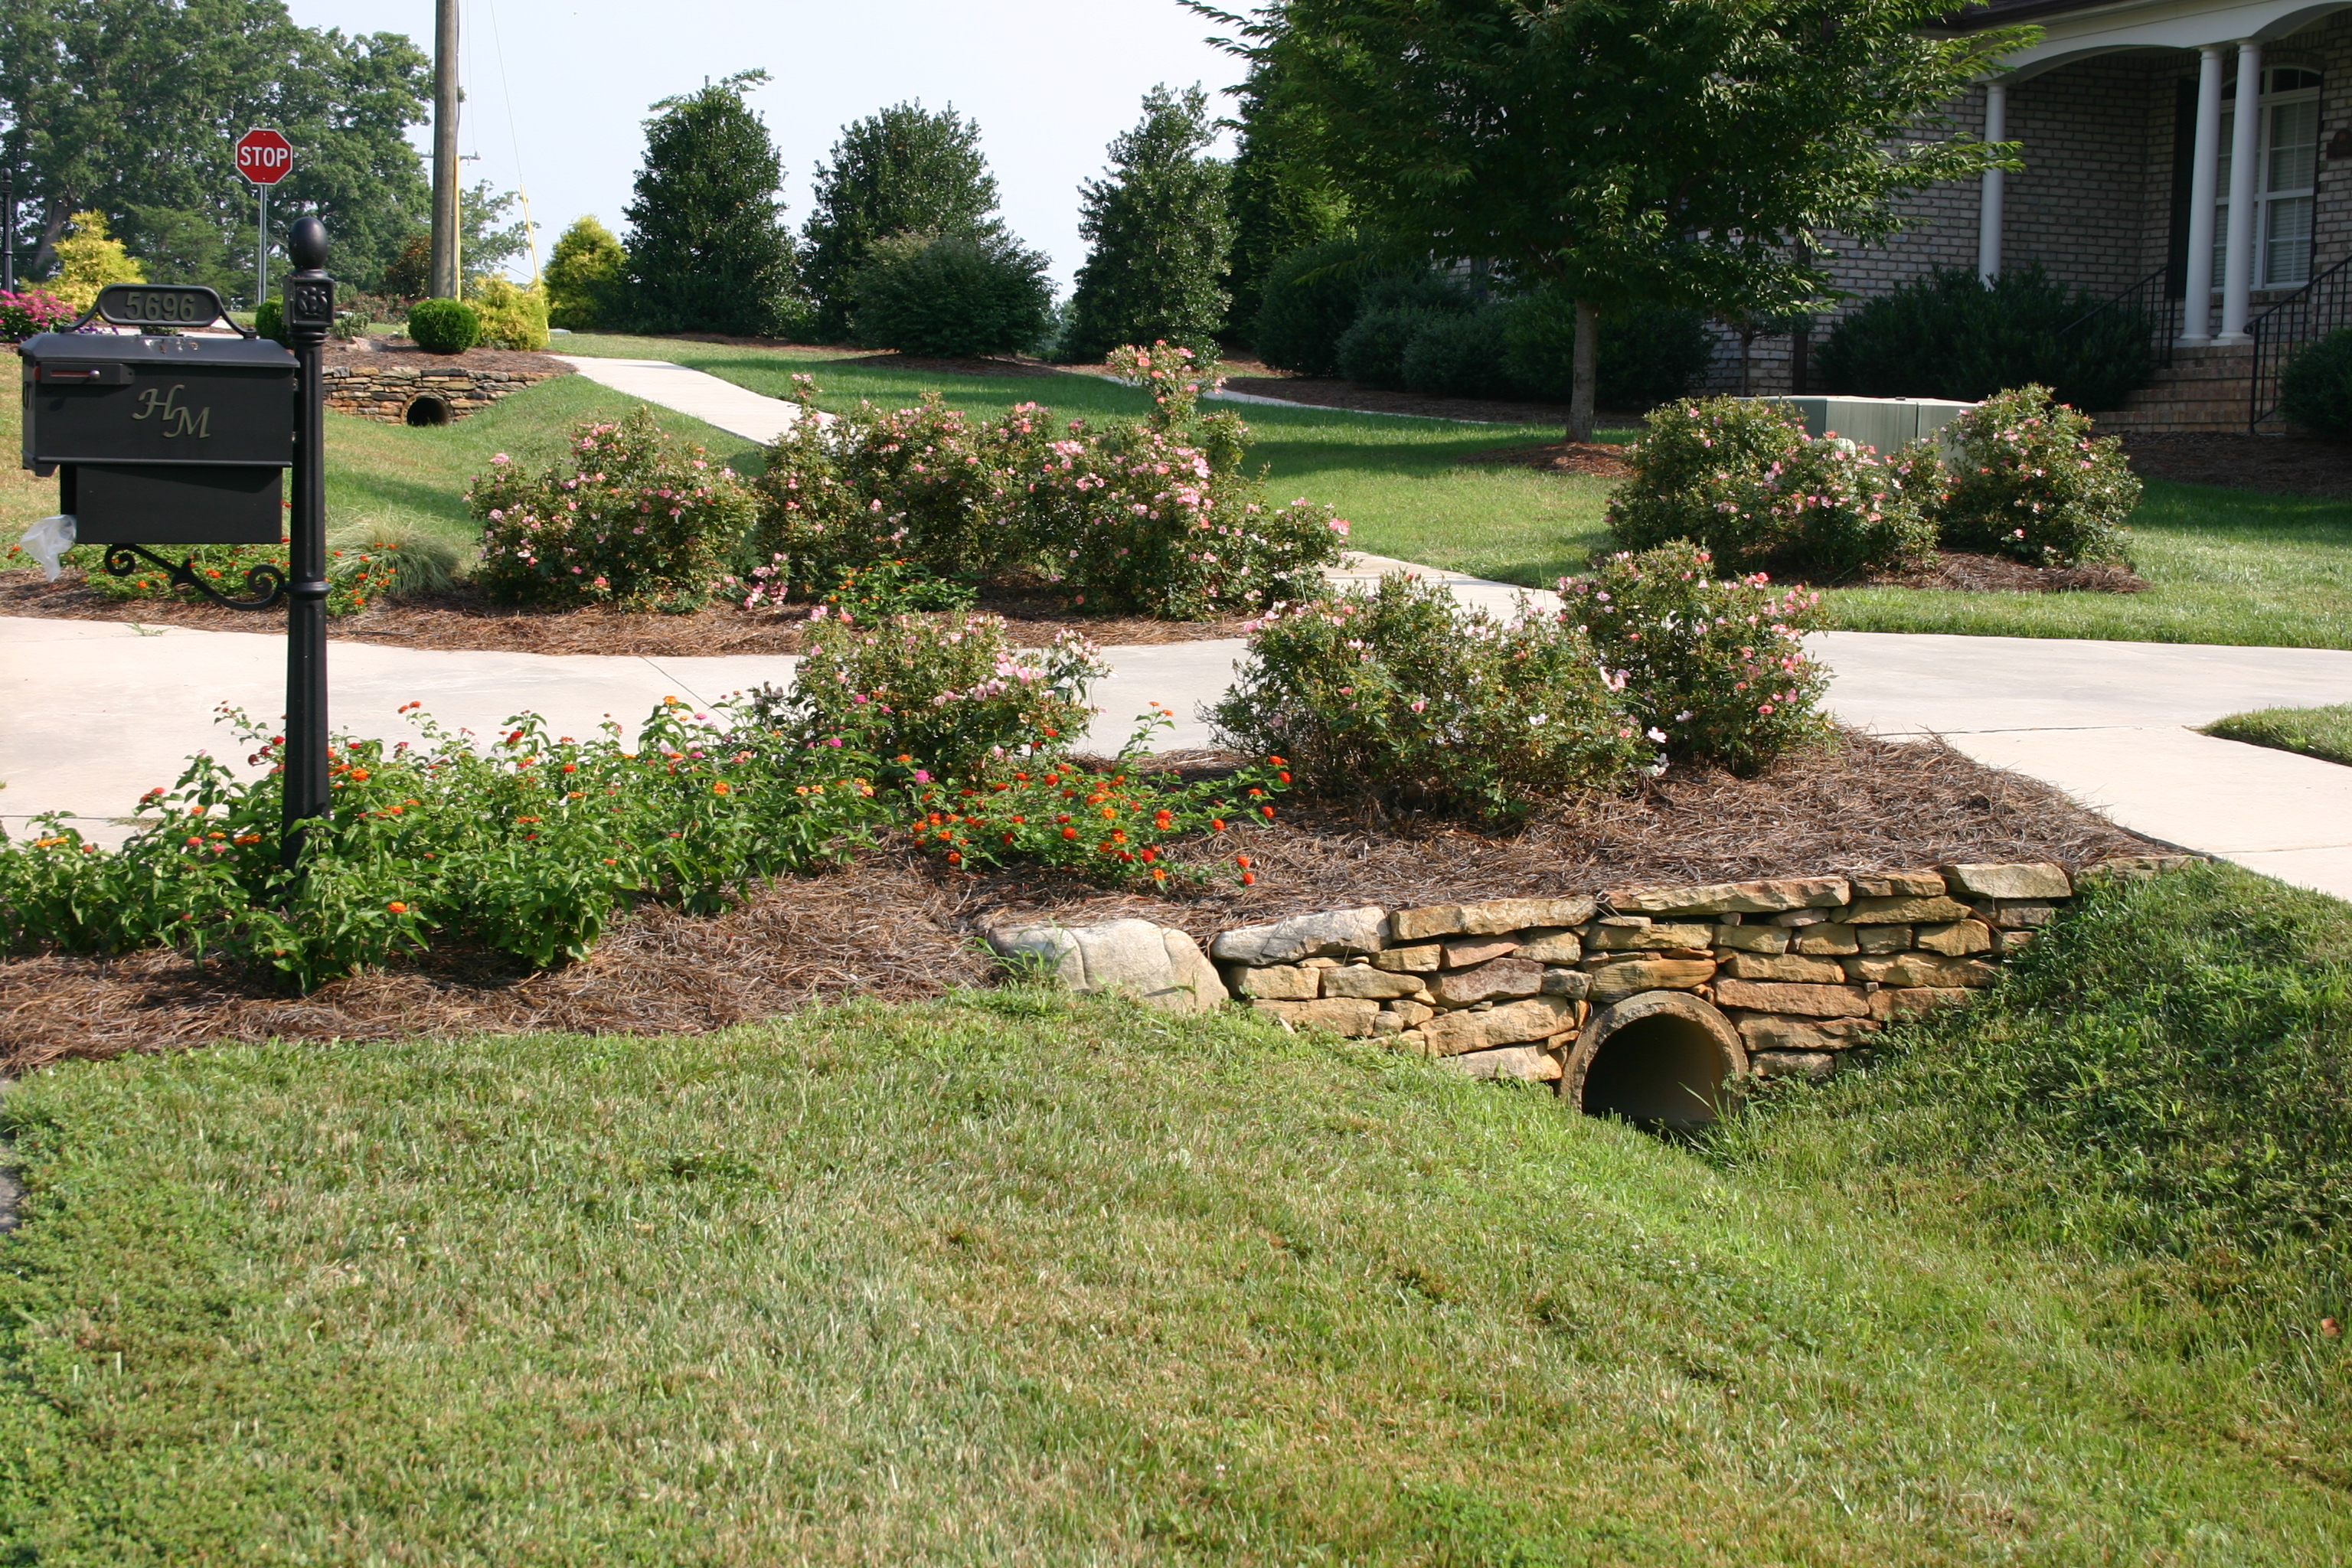 Field stones and landscaping add a nice touch to driveway culverts in ...